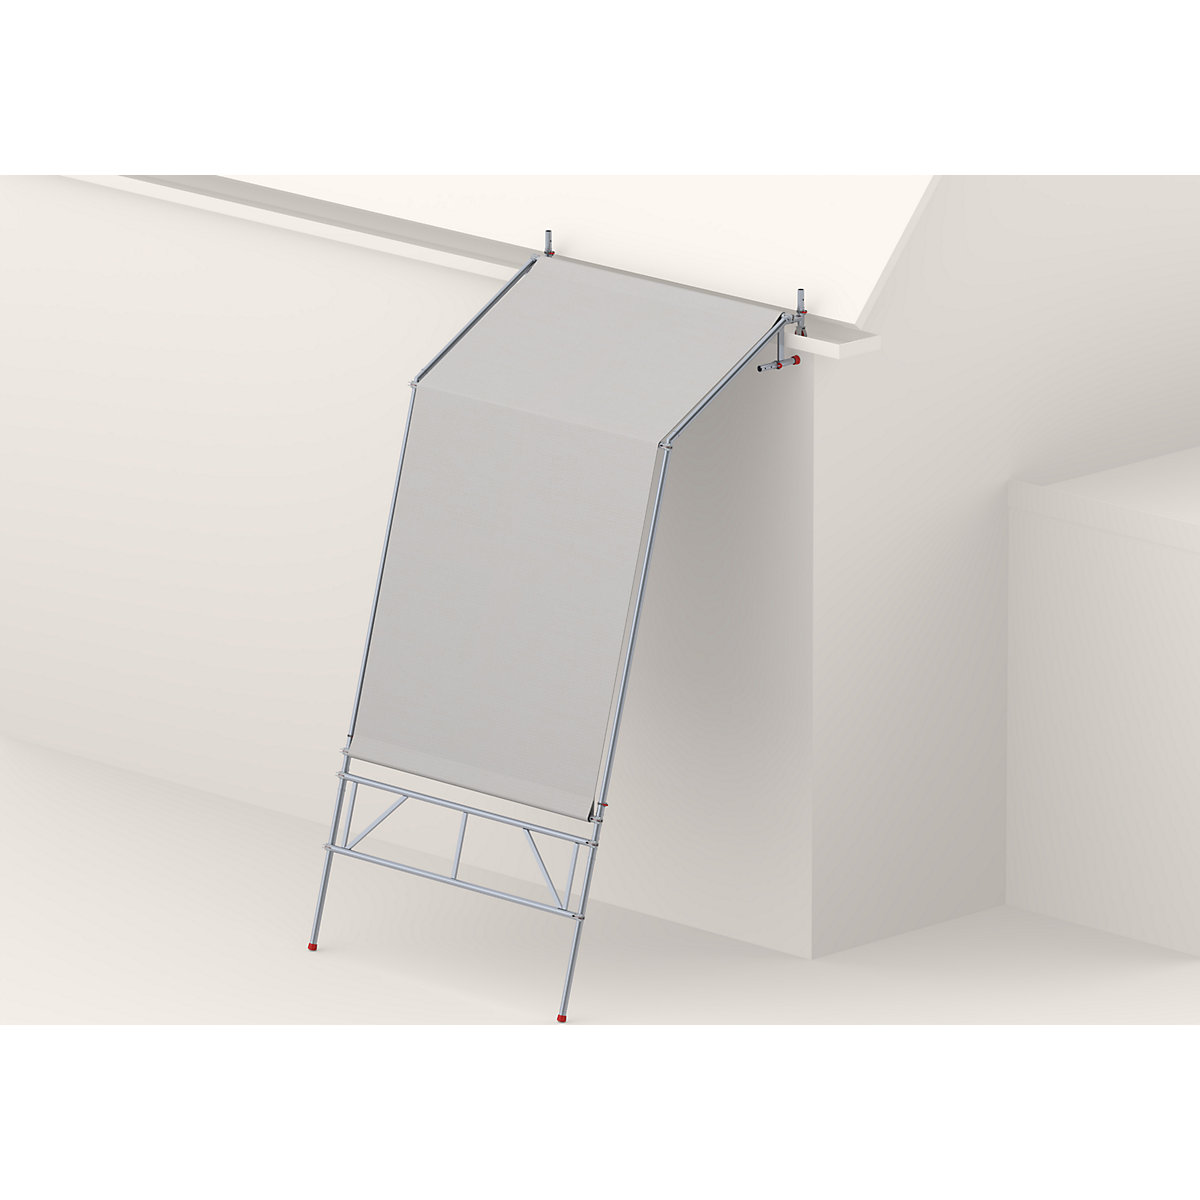 Weather protection tent for scaffolding – Altrex